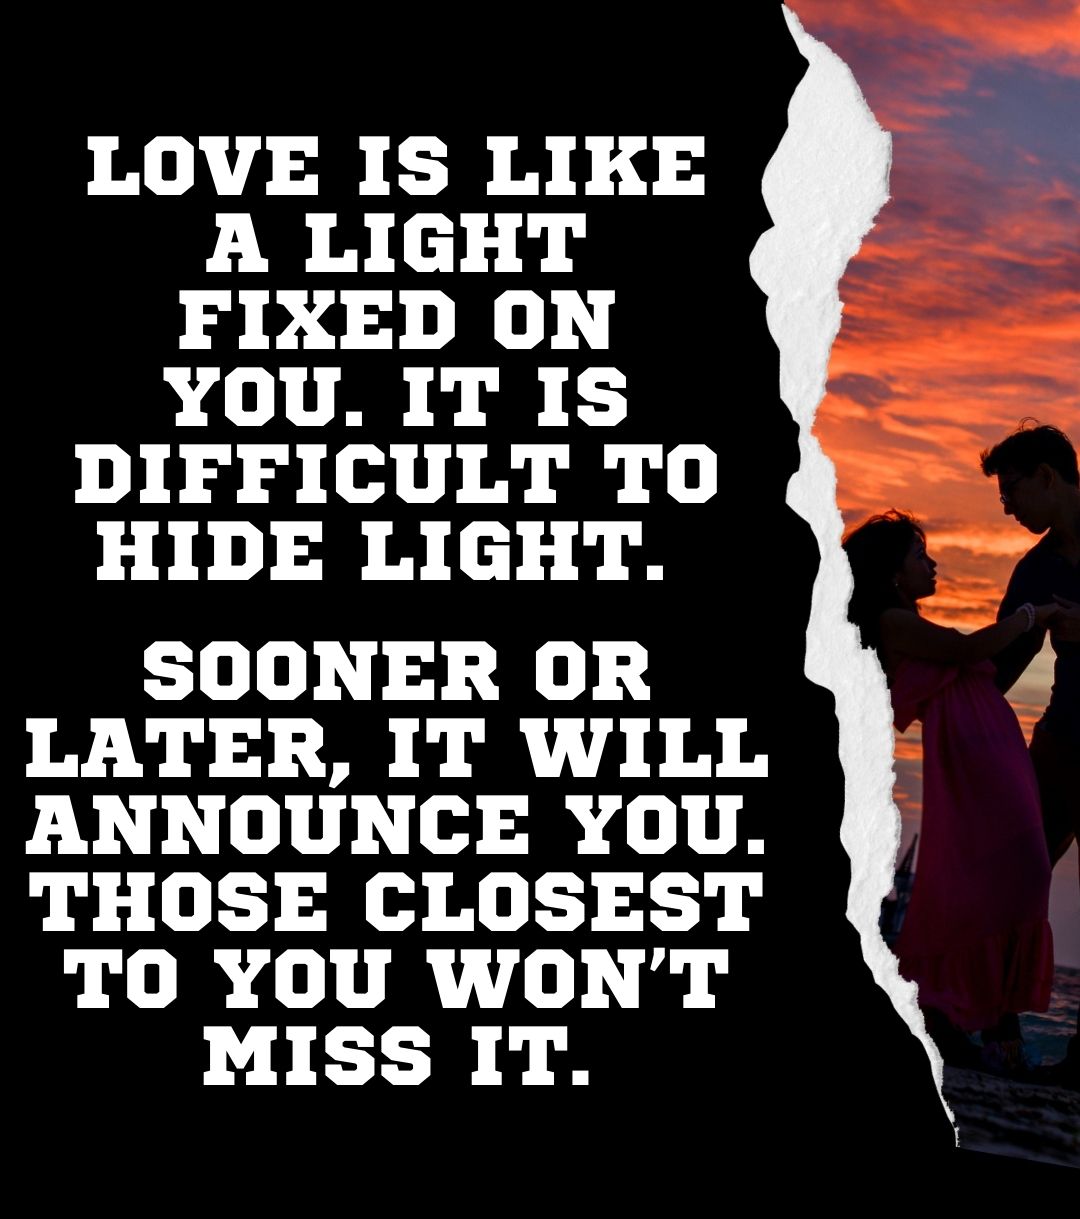 Love is like a light fixed on you. It is difficult to hide light.